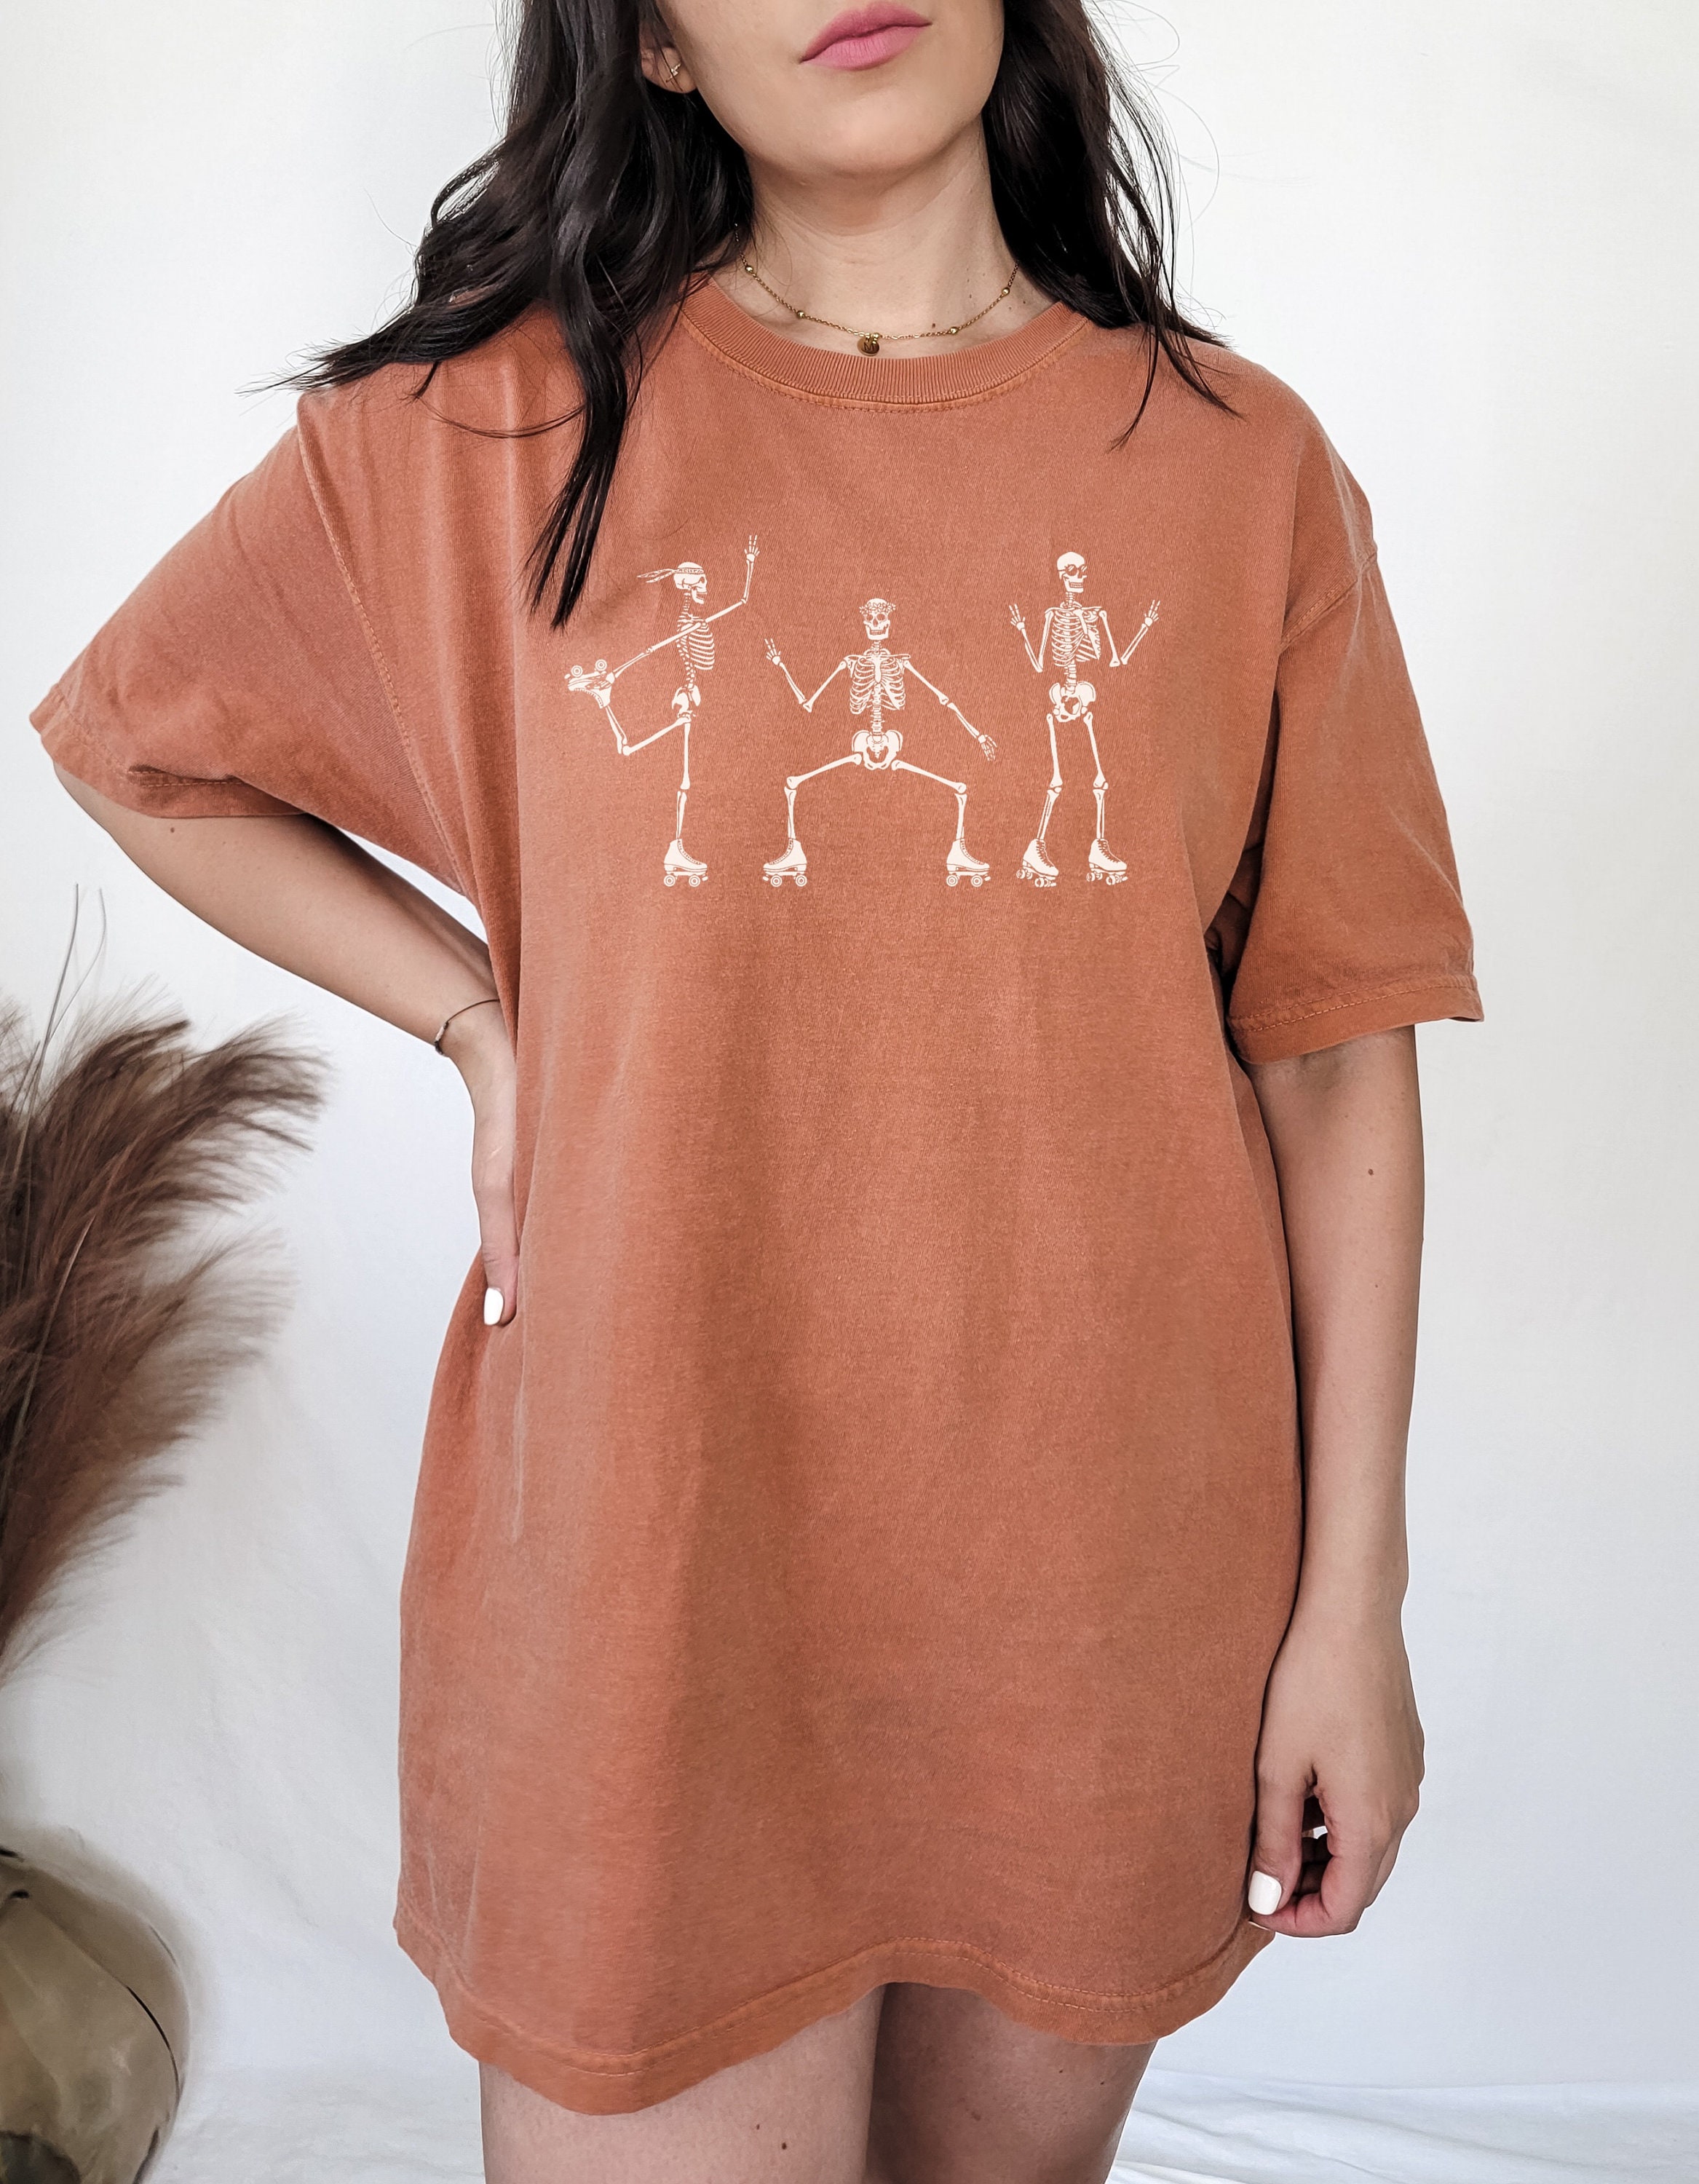 Discover Roller Skating Skeletons T-Shirt - Cozy Fall Tee, Vintage Look and Feel Oversized Shirt for Halloween